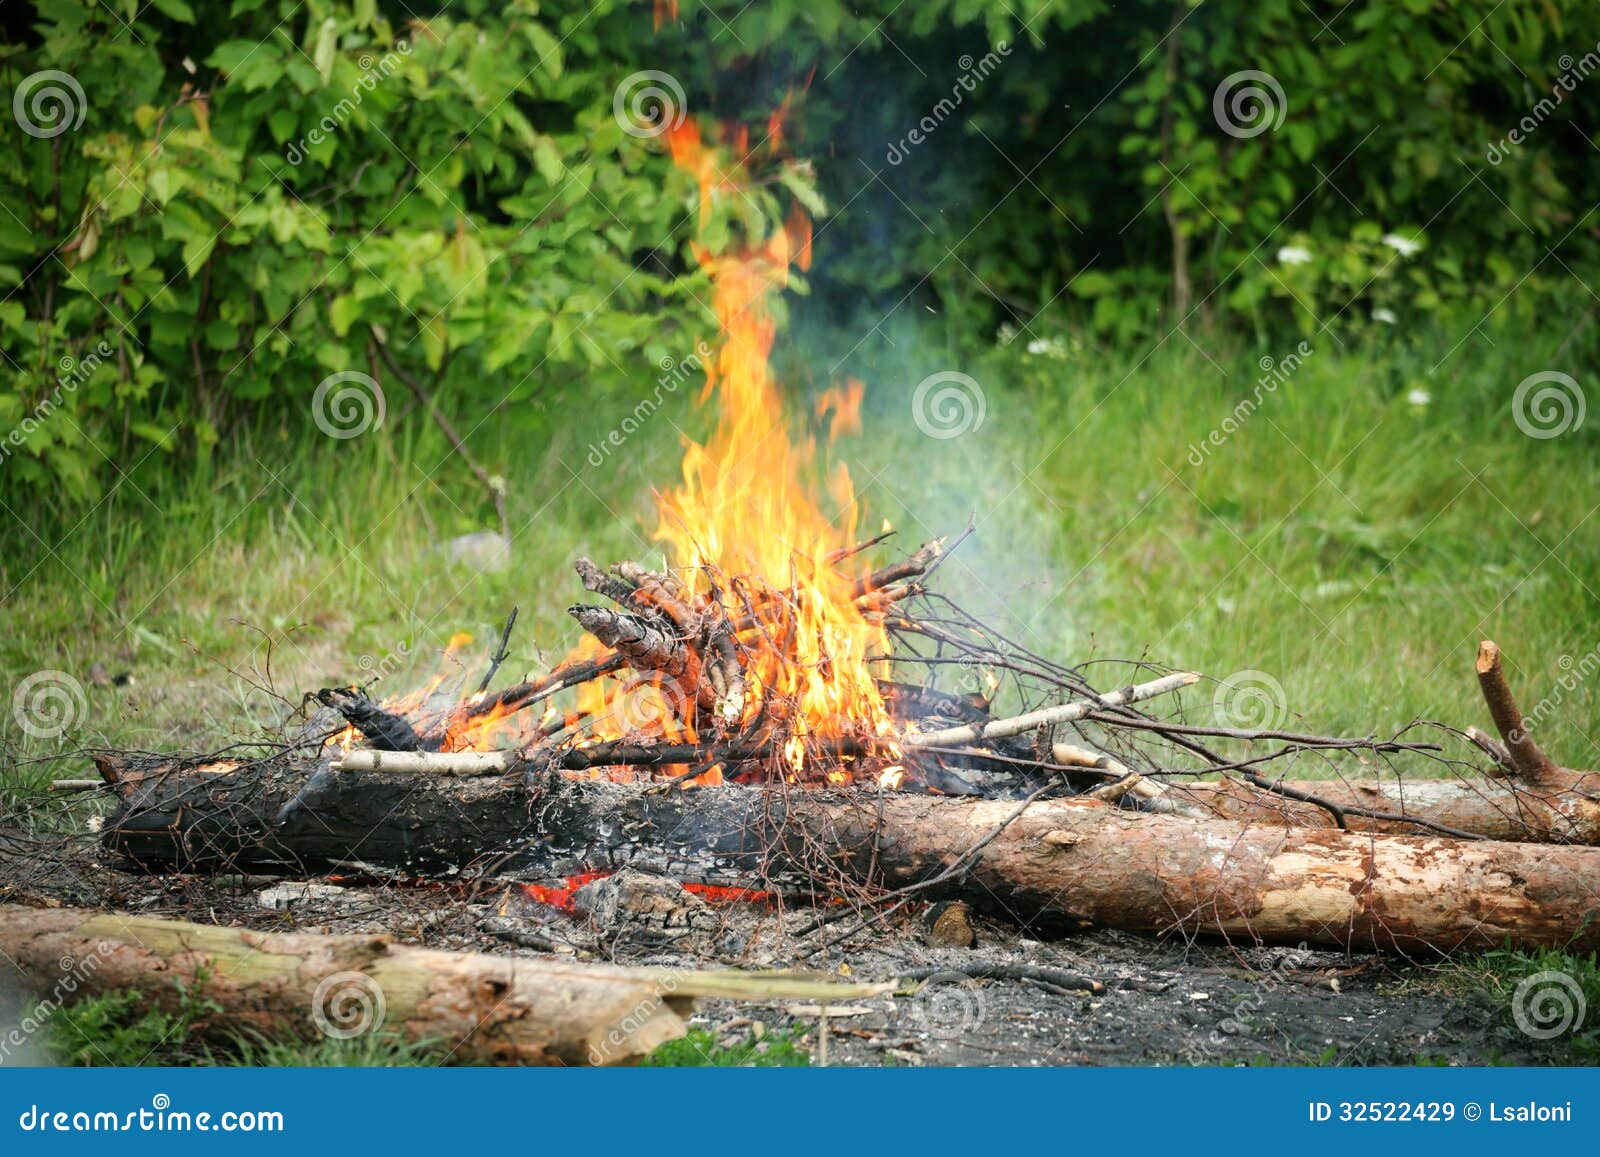 Bonfire Campfire Fire Summer Forest Royalty Free Stock Images - Image ...